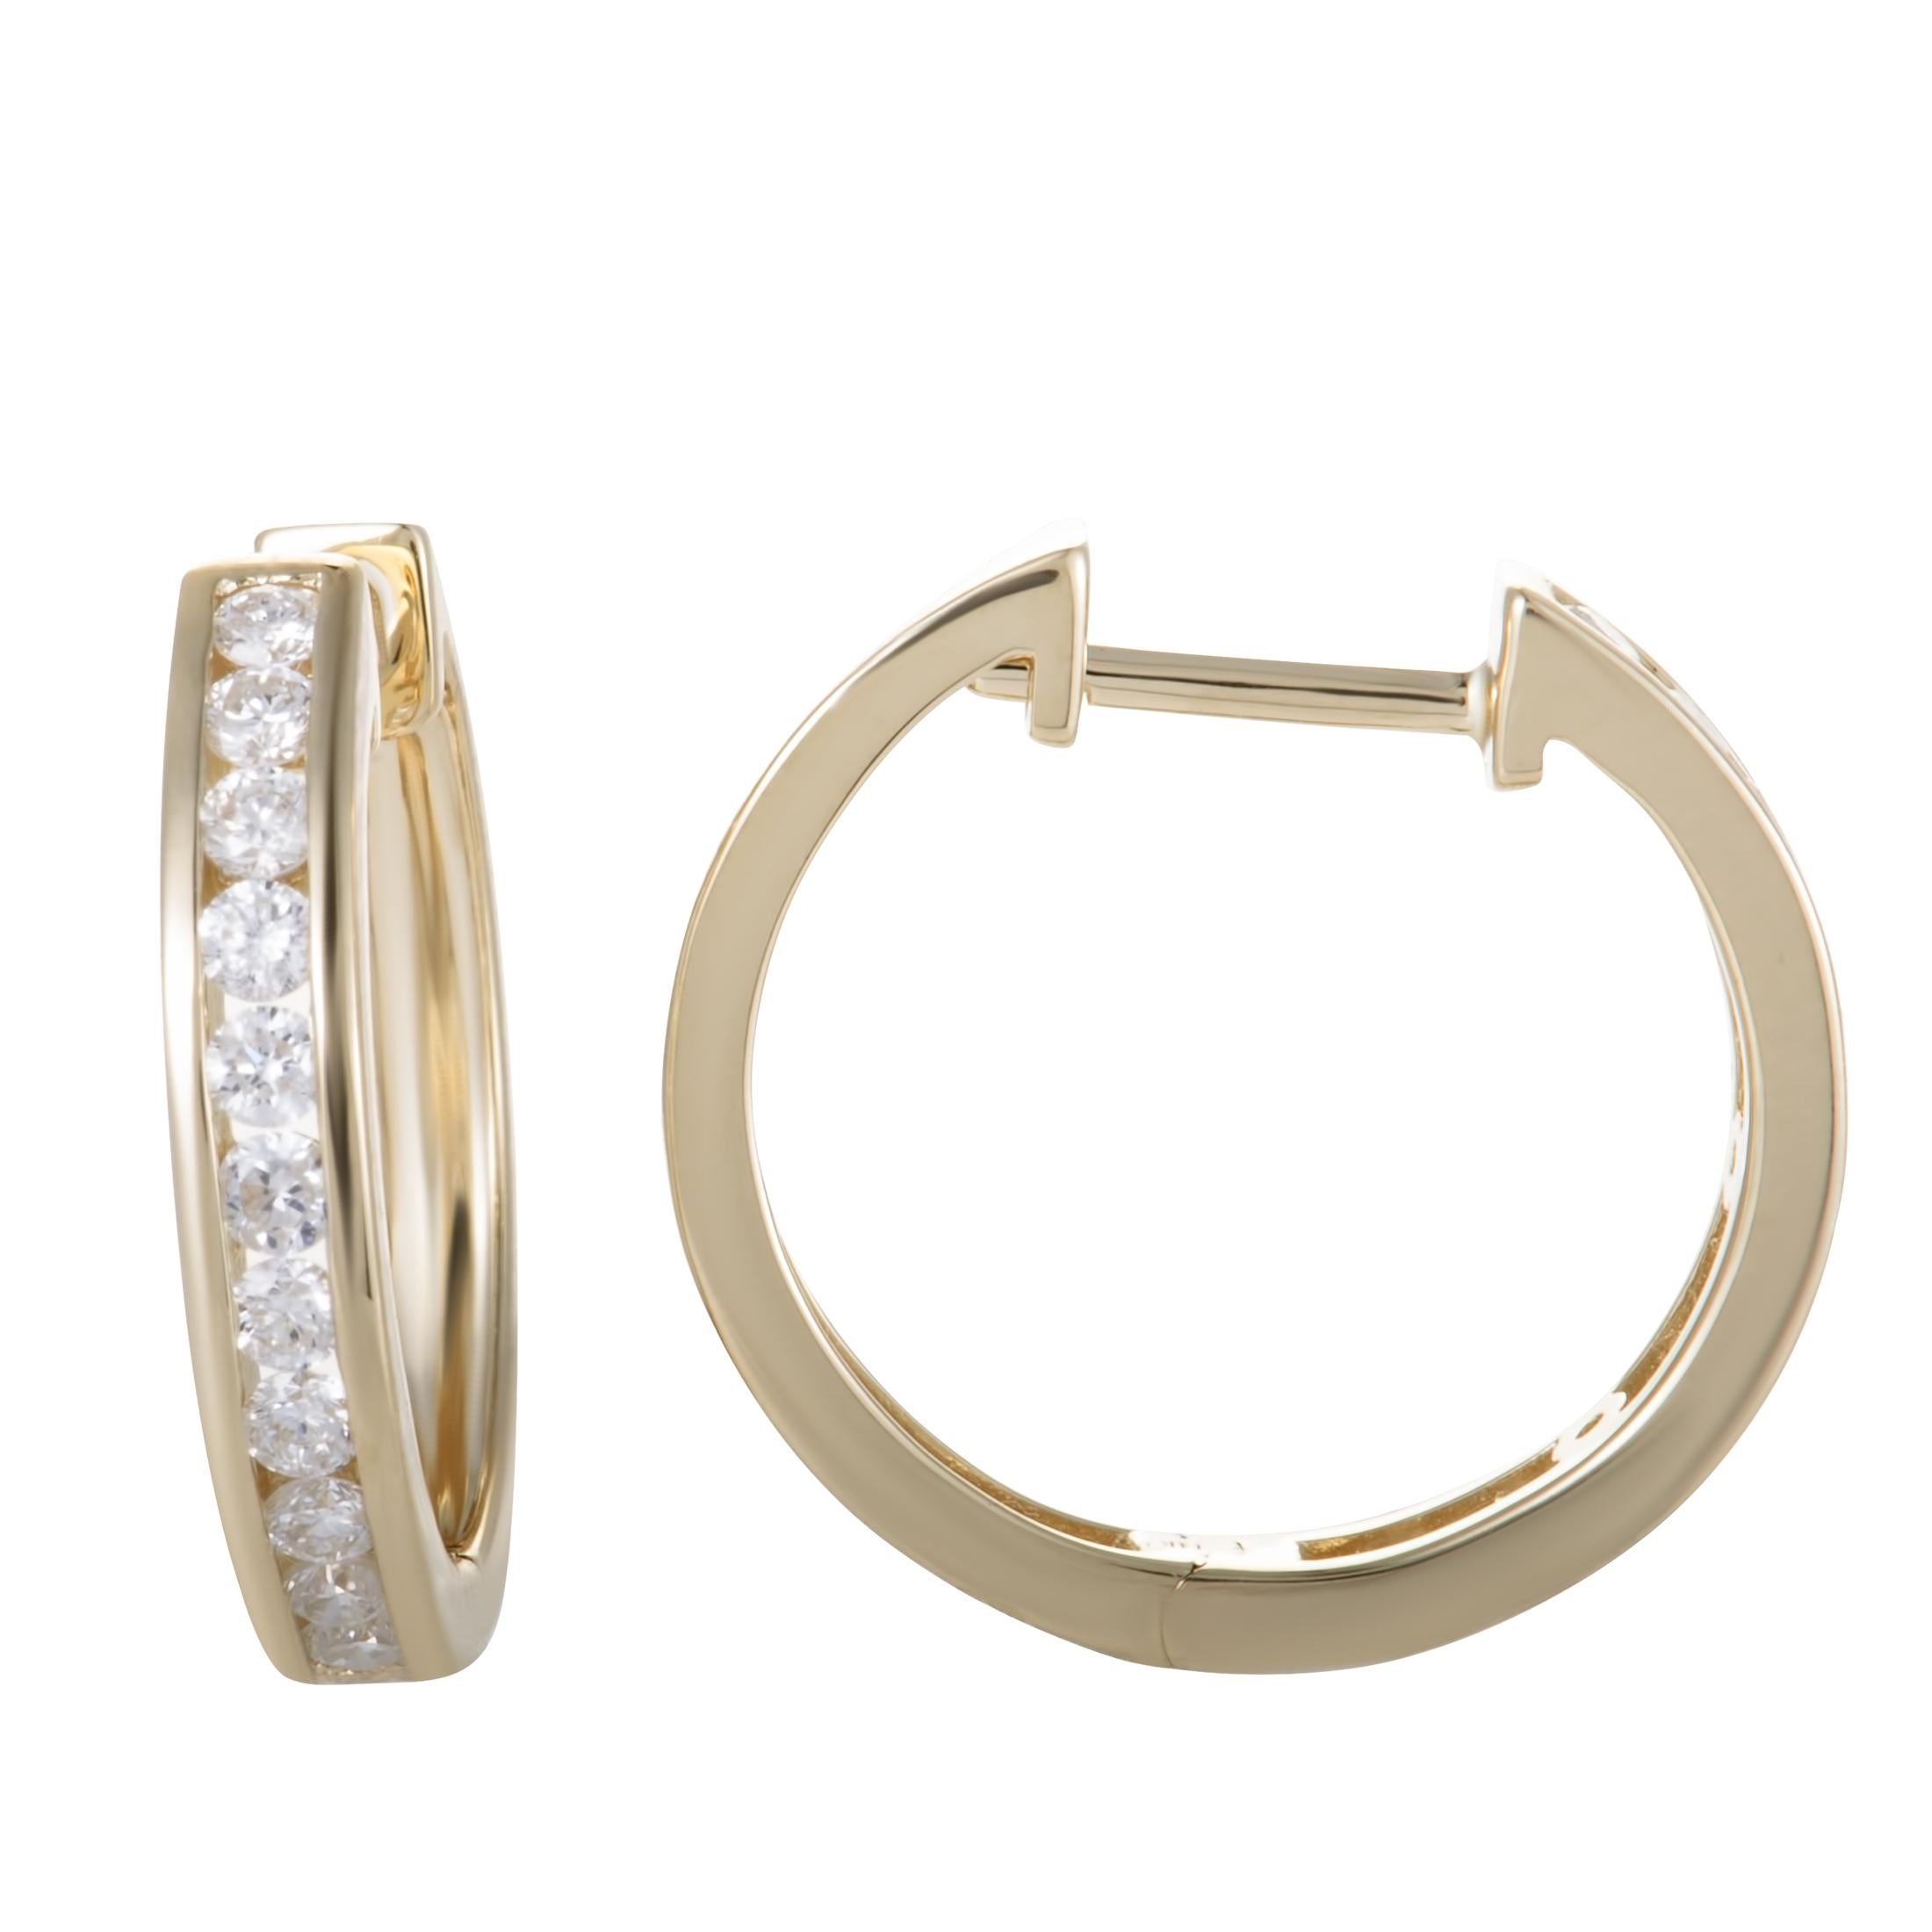 LB Exclusive 14K Yellow Gold 0.50 ct Diamond Hoop Earrings In New Condition For Sale In Southampton, PA